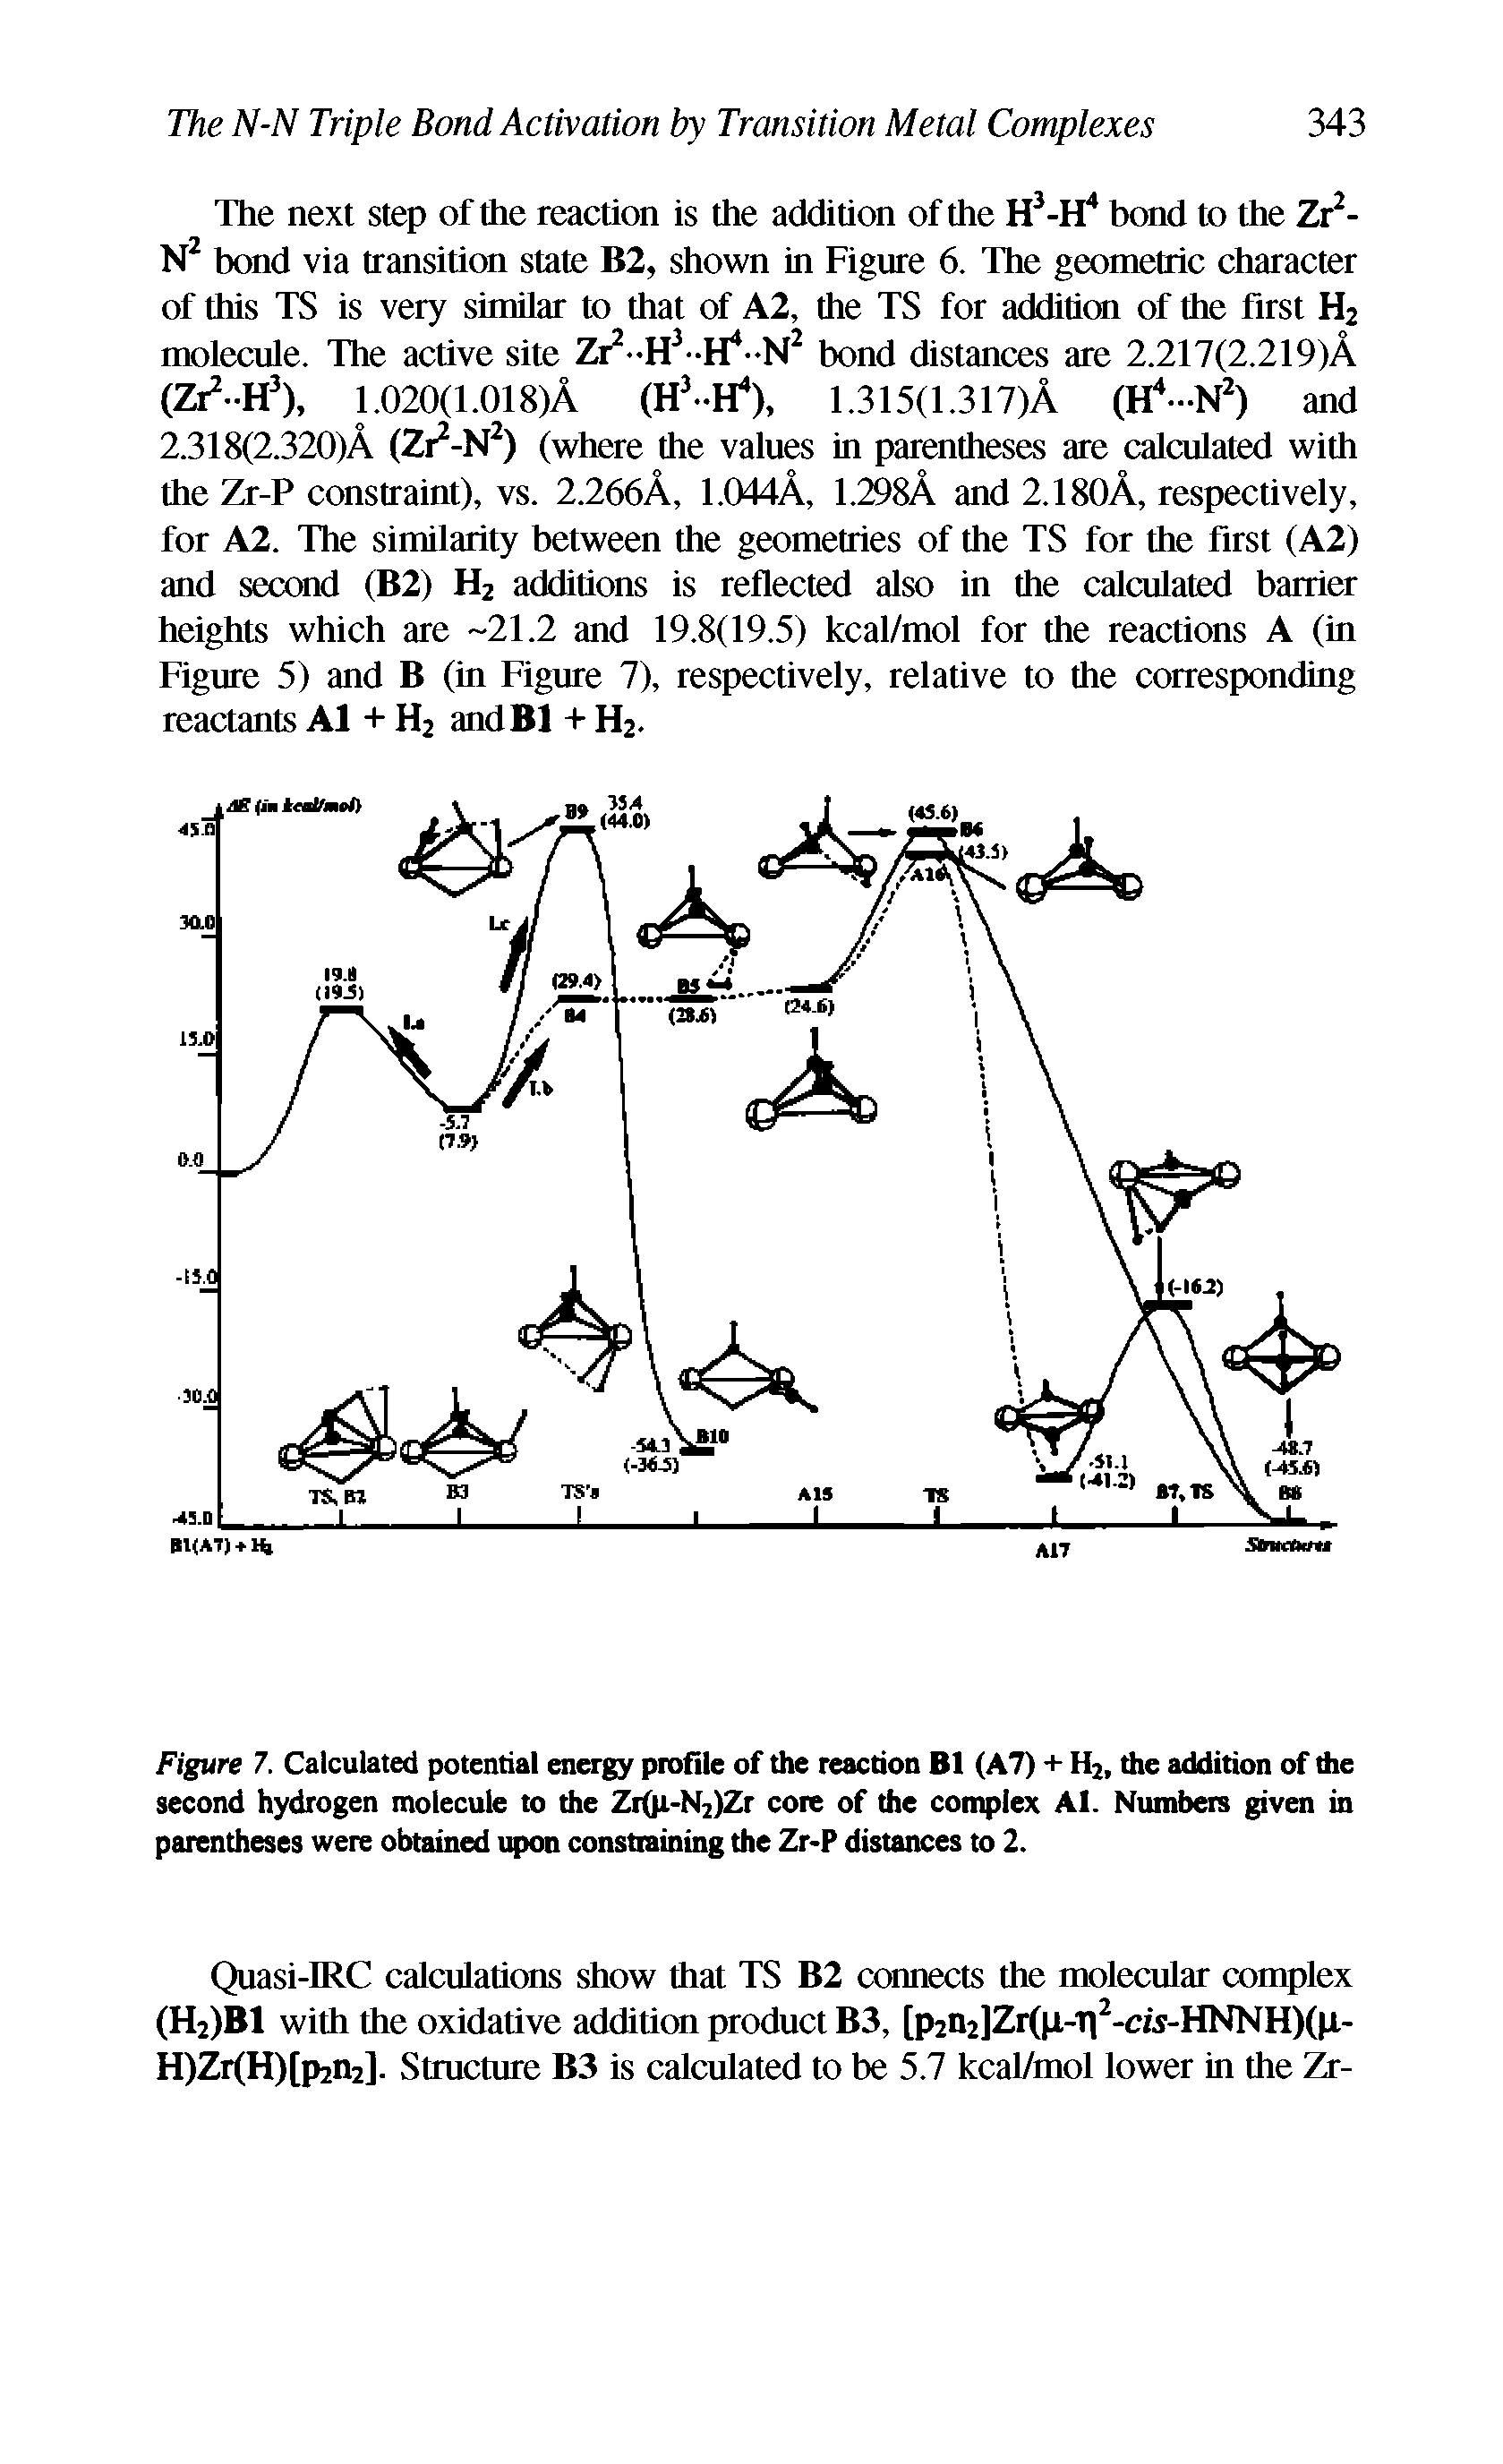 Figure 7. Calculated potential energy profile of the reaction B1 (A7) + H2, the addition of the second hydrogen molecule to the Zr(ji-N2)Zr core of the complex Al. Numbers given in parentheses were obtained upon constraining the Zr-P distances to 2.